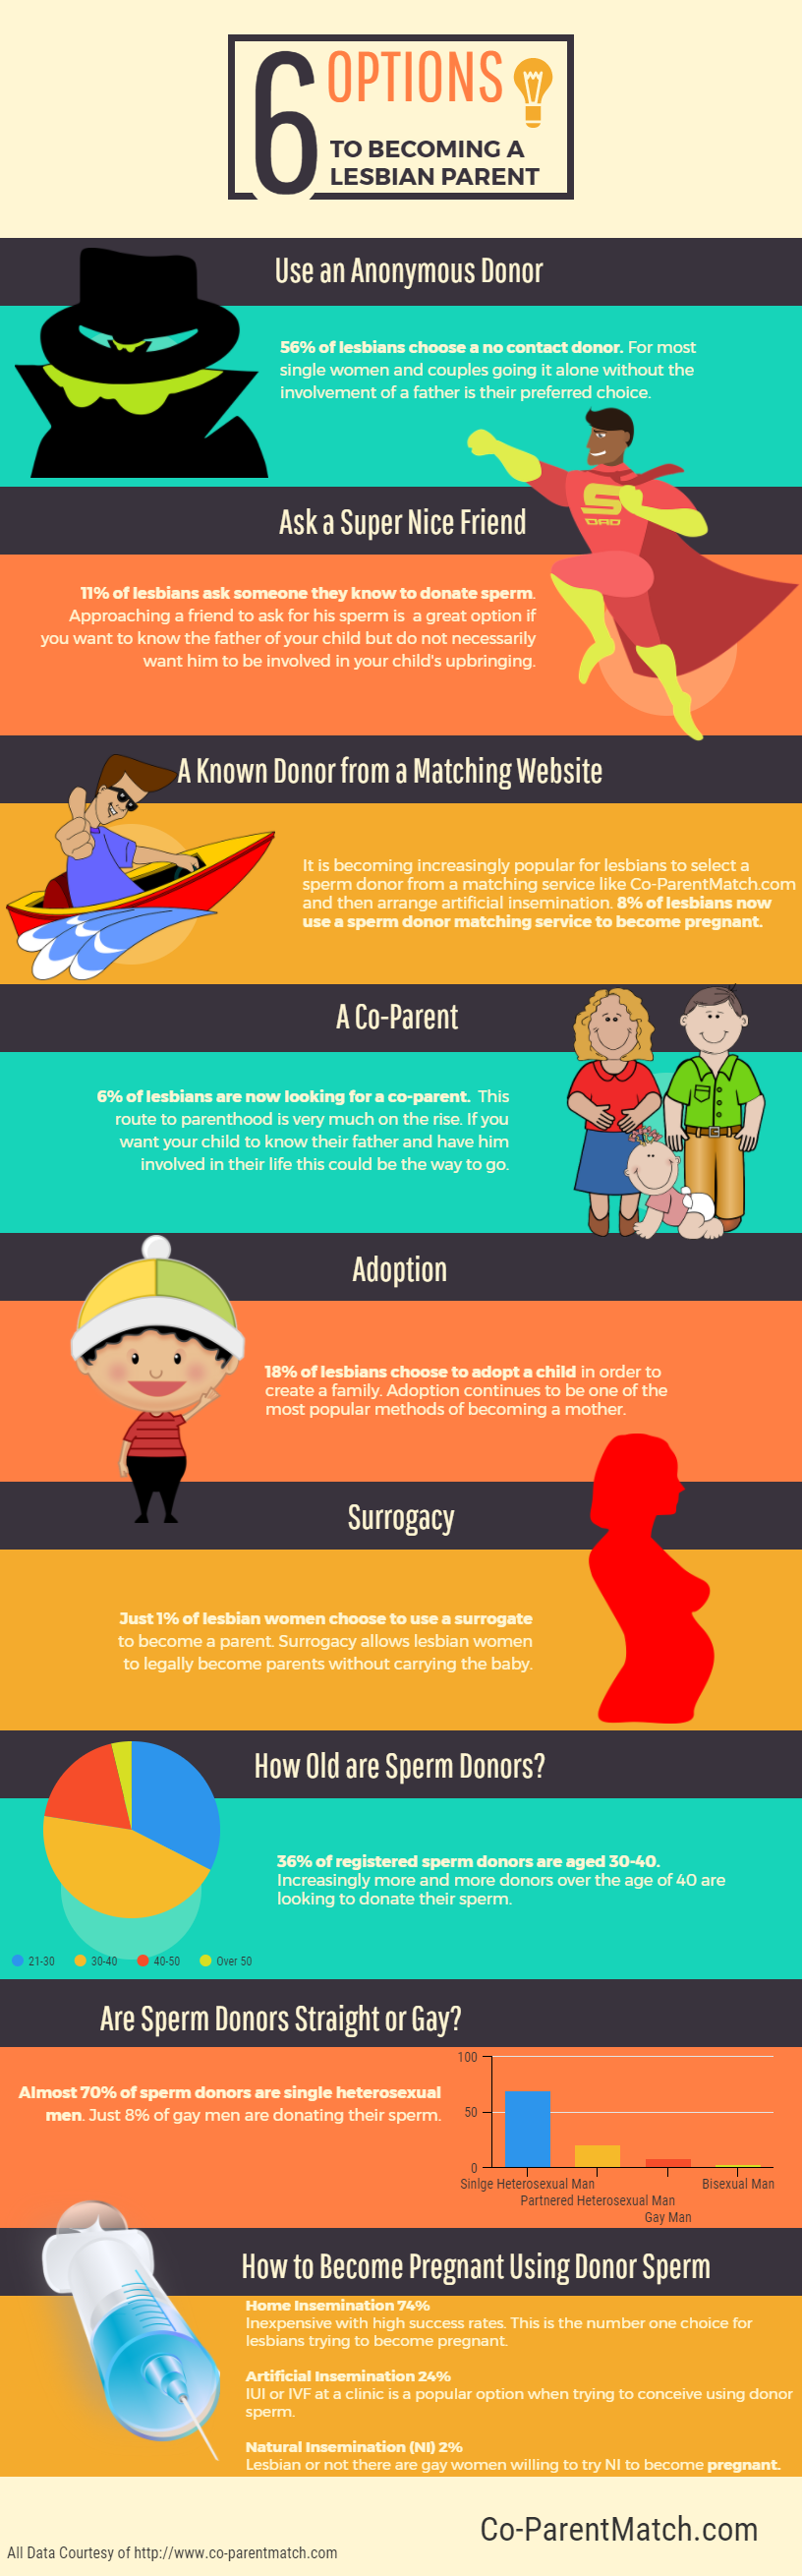 6 Options to Becoming a Lesbian Parent Infographic